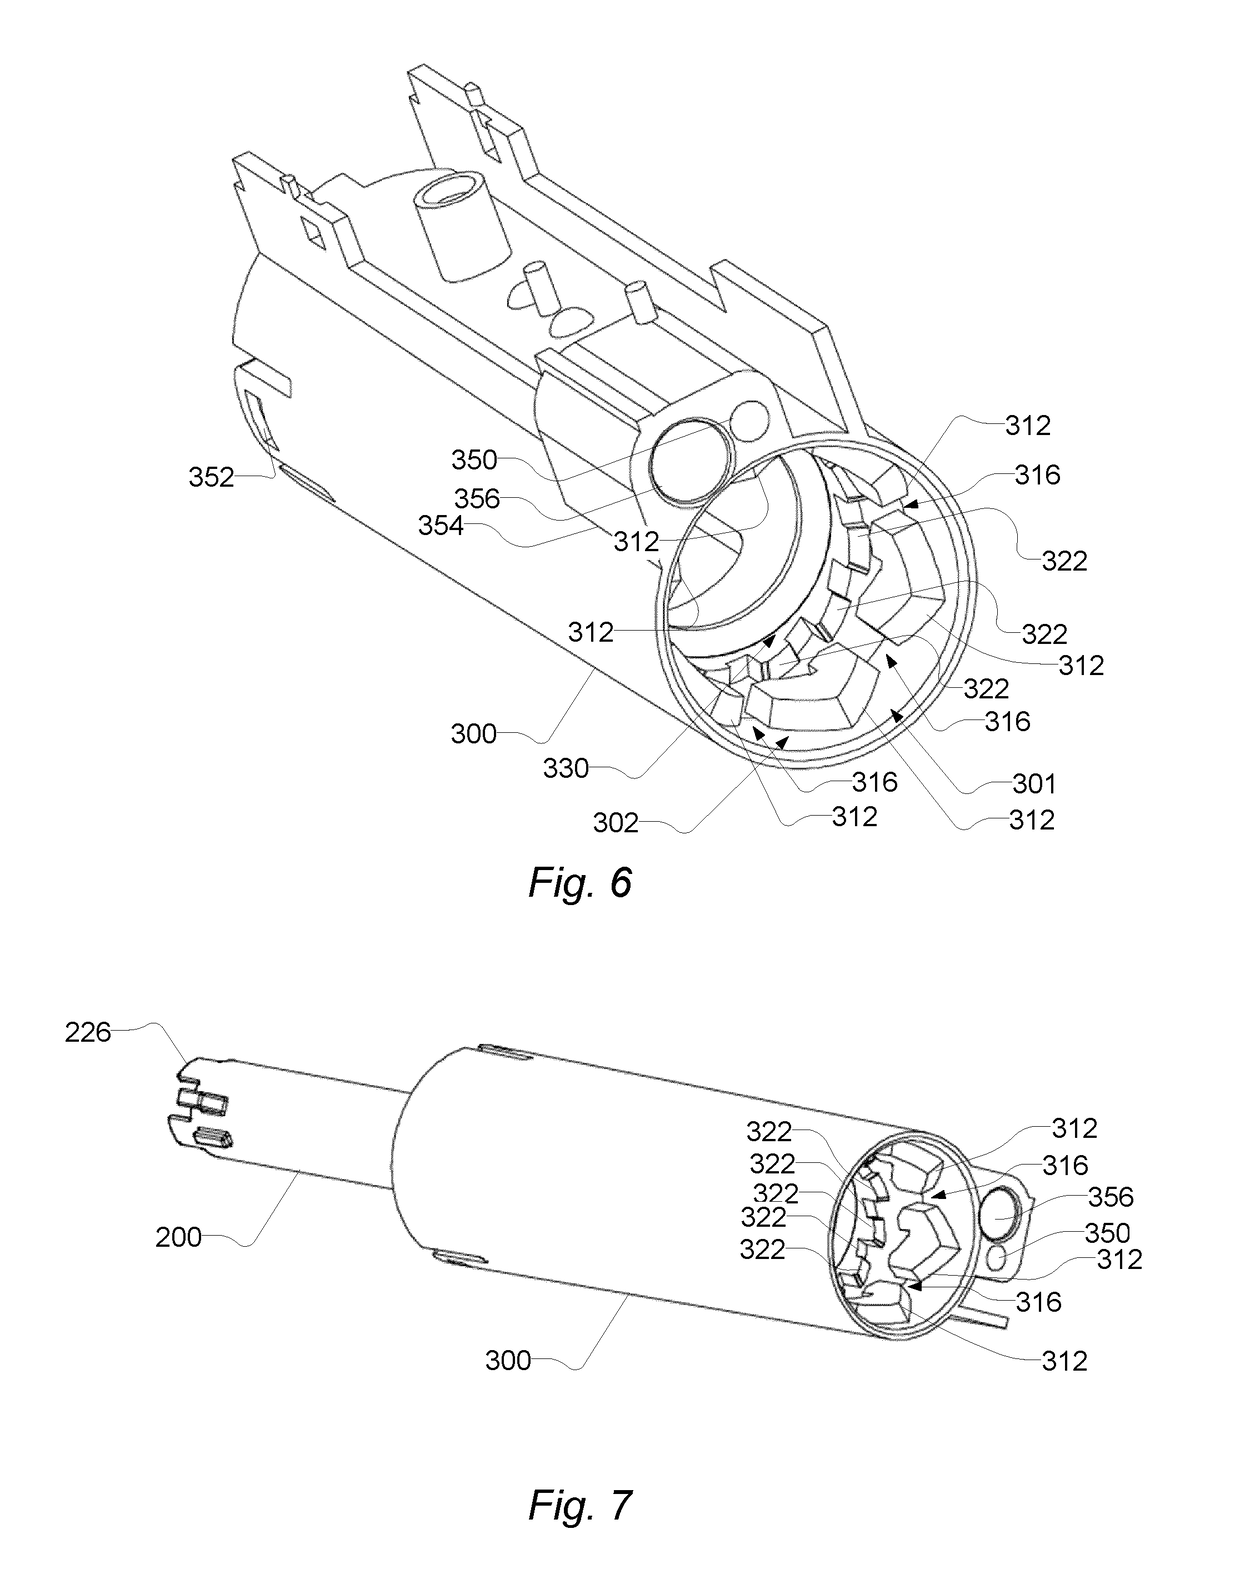 Auto injector with cartridge retention system